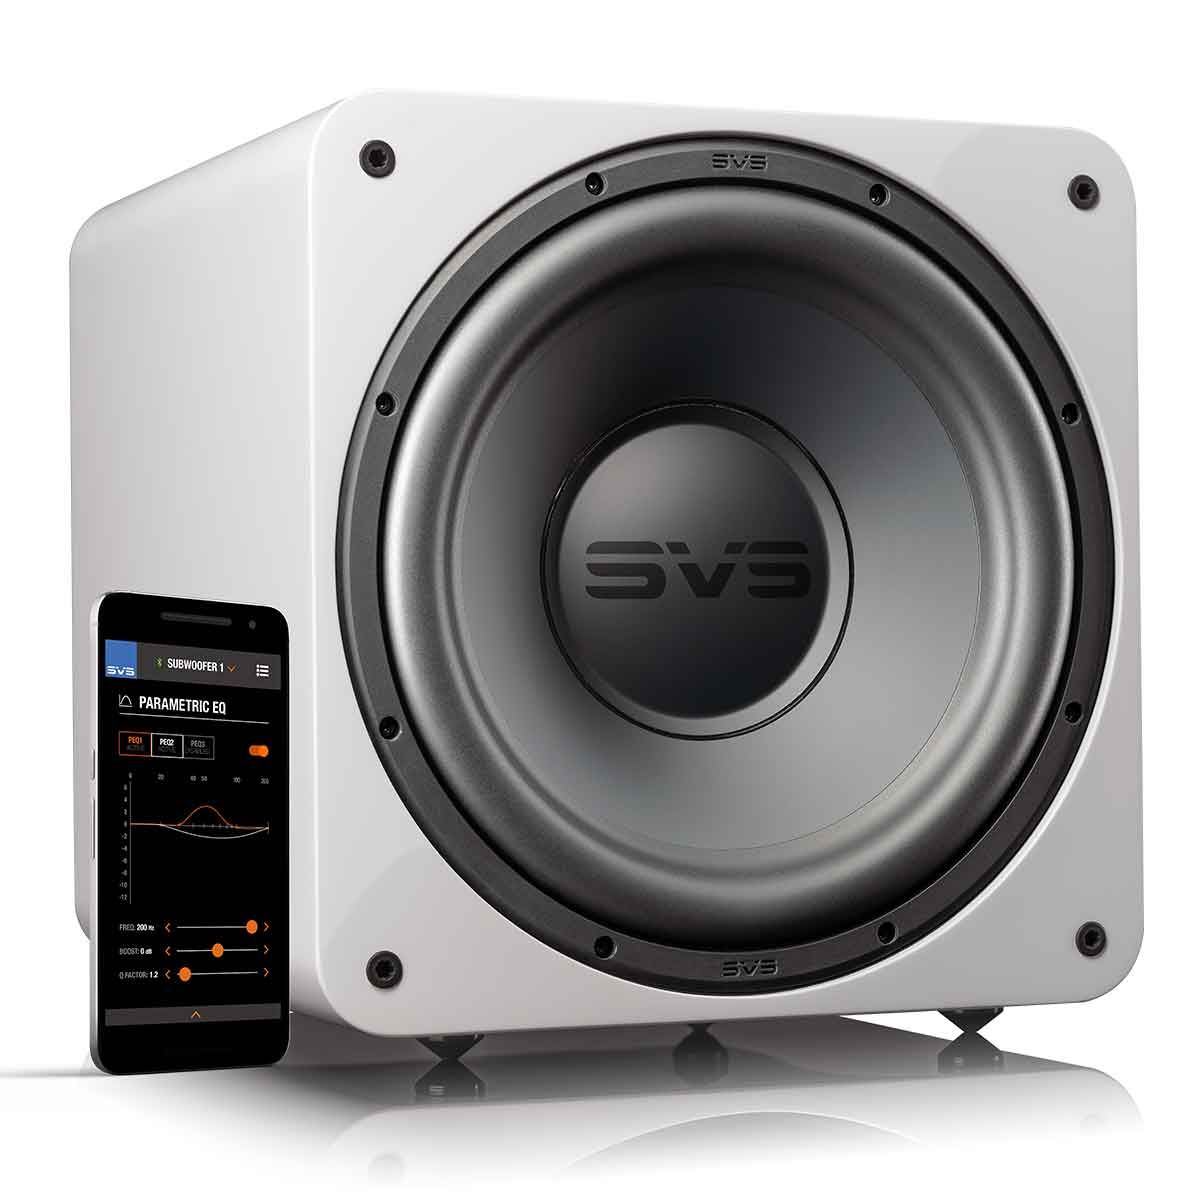 SVS SB-1000 Pro Series Subwoofer in Gloss White with SVS smartphone app